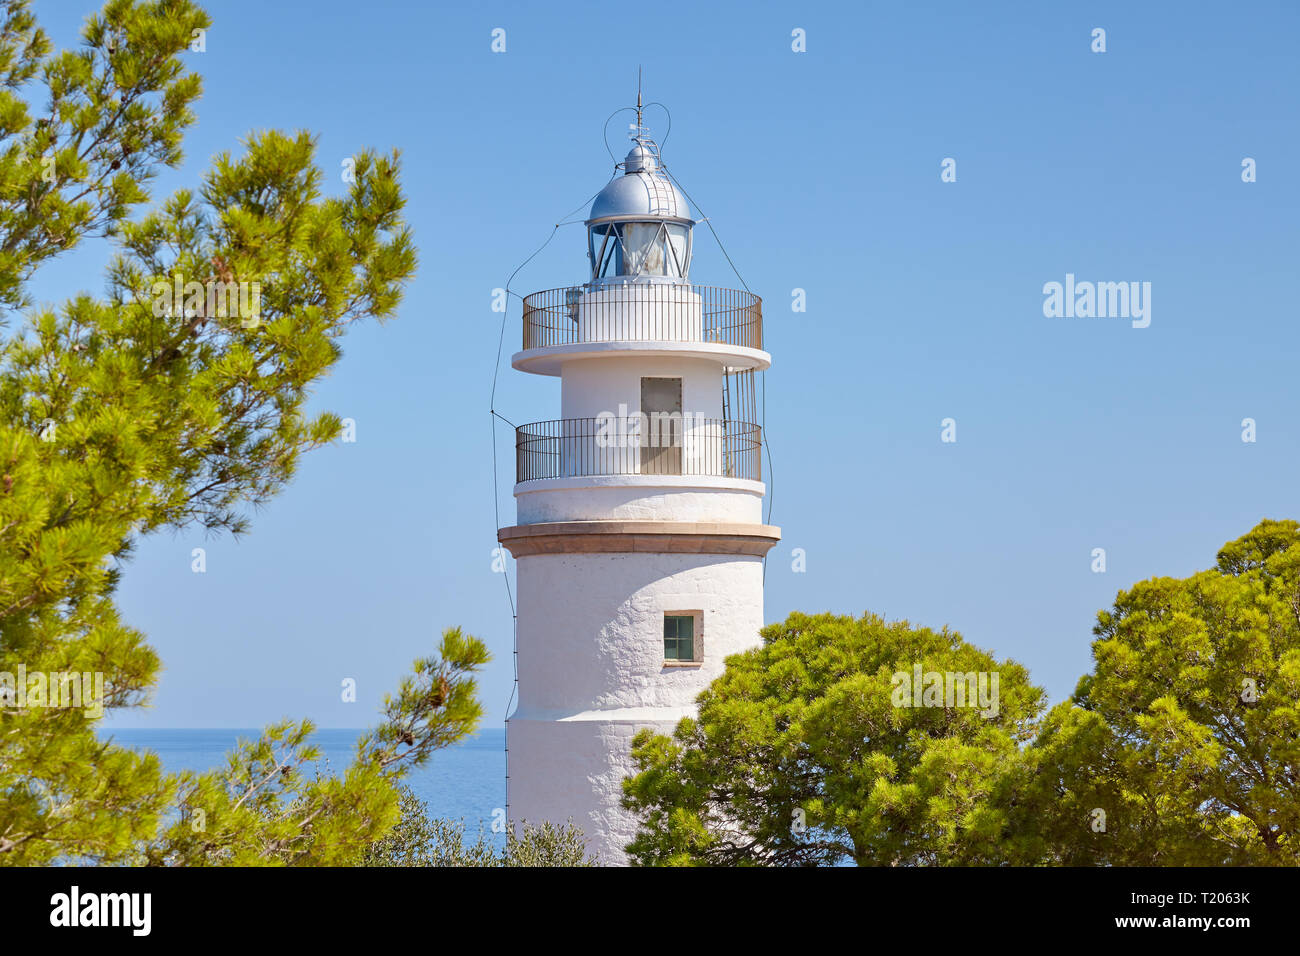 Cap Gros lighthouse located on a cliff in the vicinity of Port Soller, Mallorca, Spain. Stock Photo